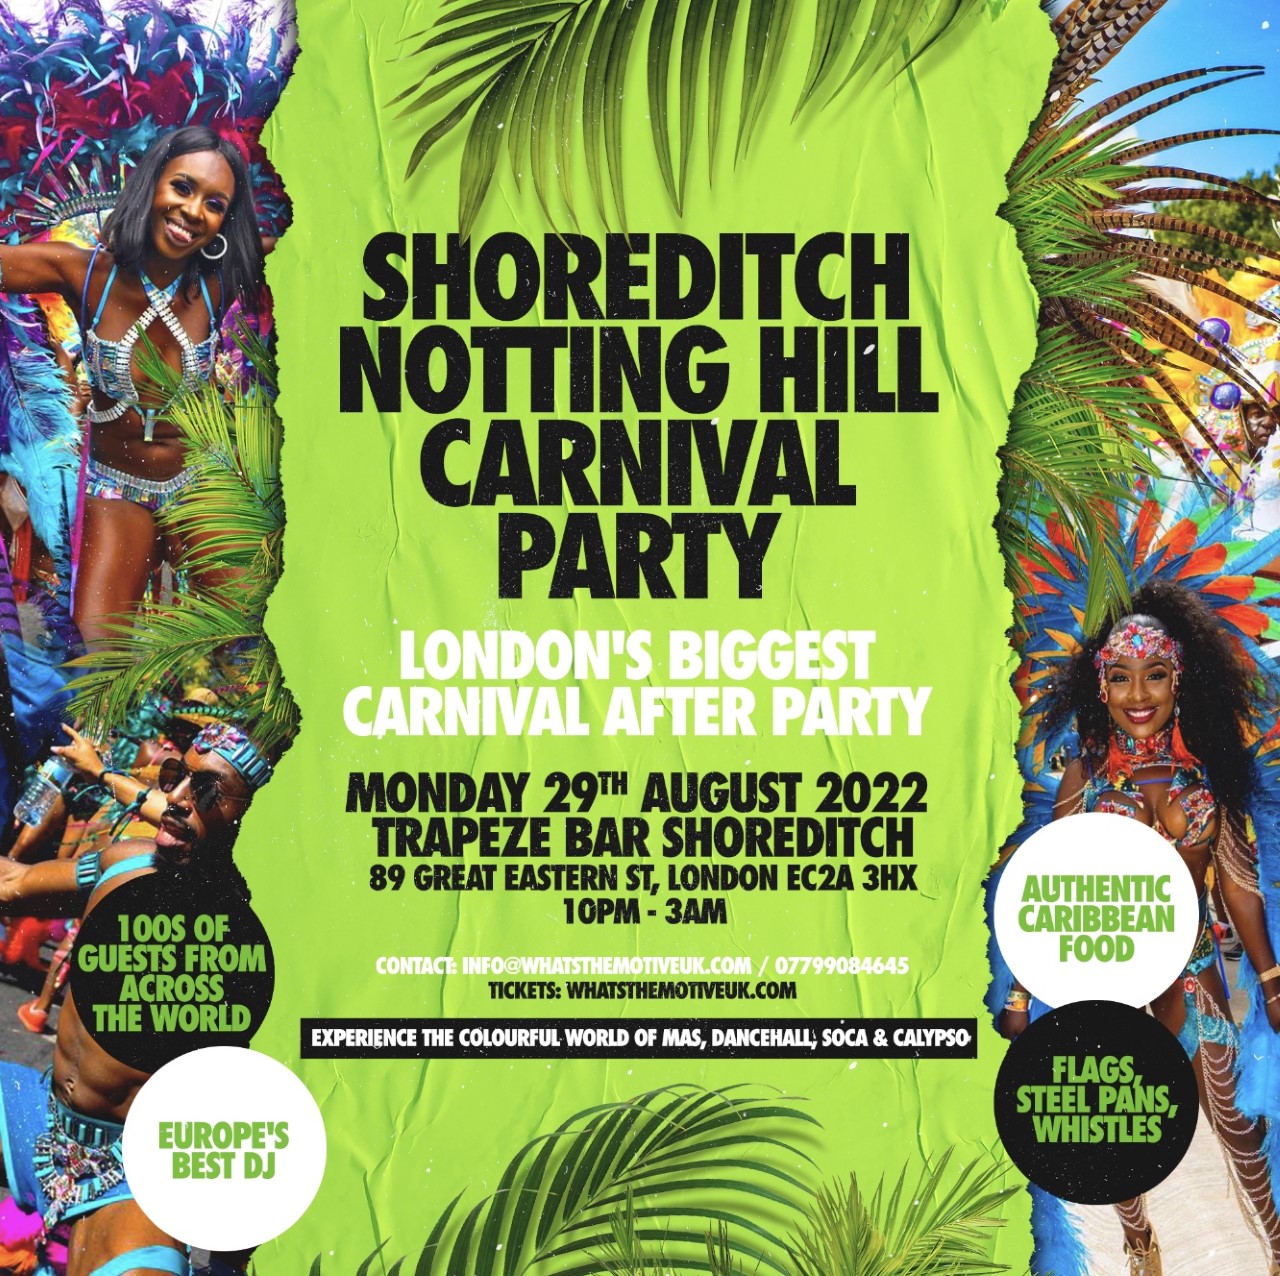 SOUTH LONDON NOTTING HILL CARNIVAL PARTY at Lit, London on 29th Aug 2022 Fatsoma